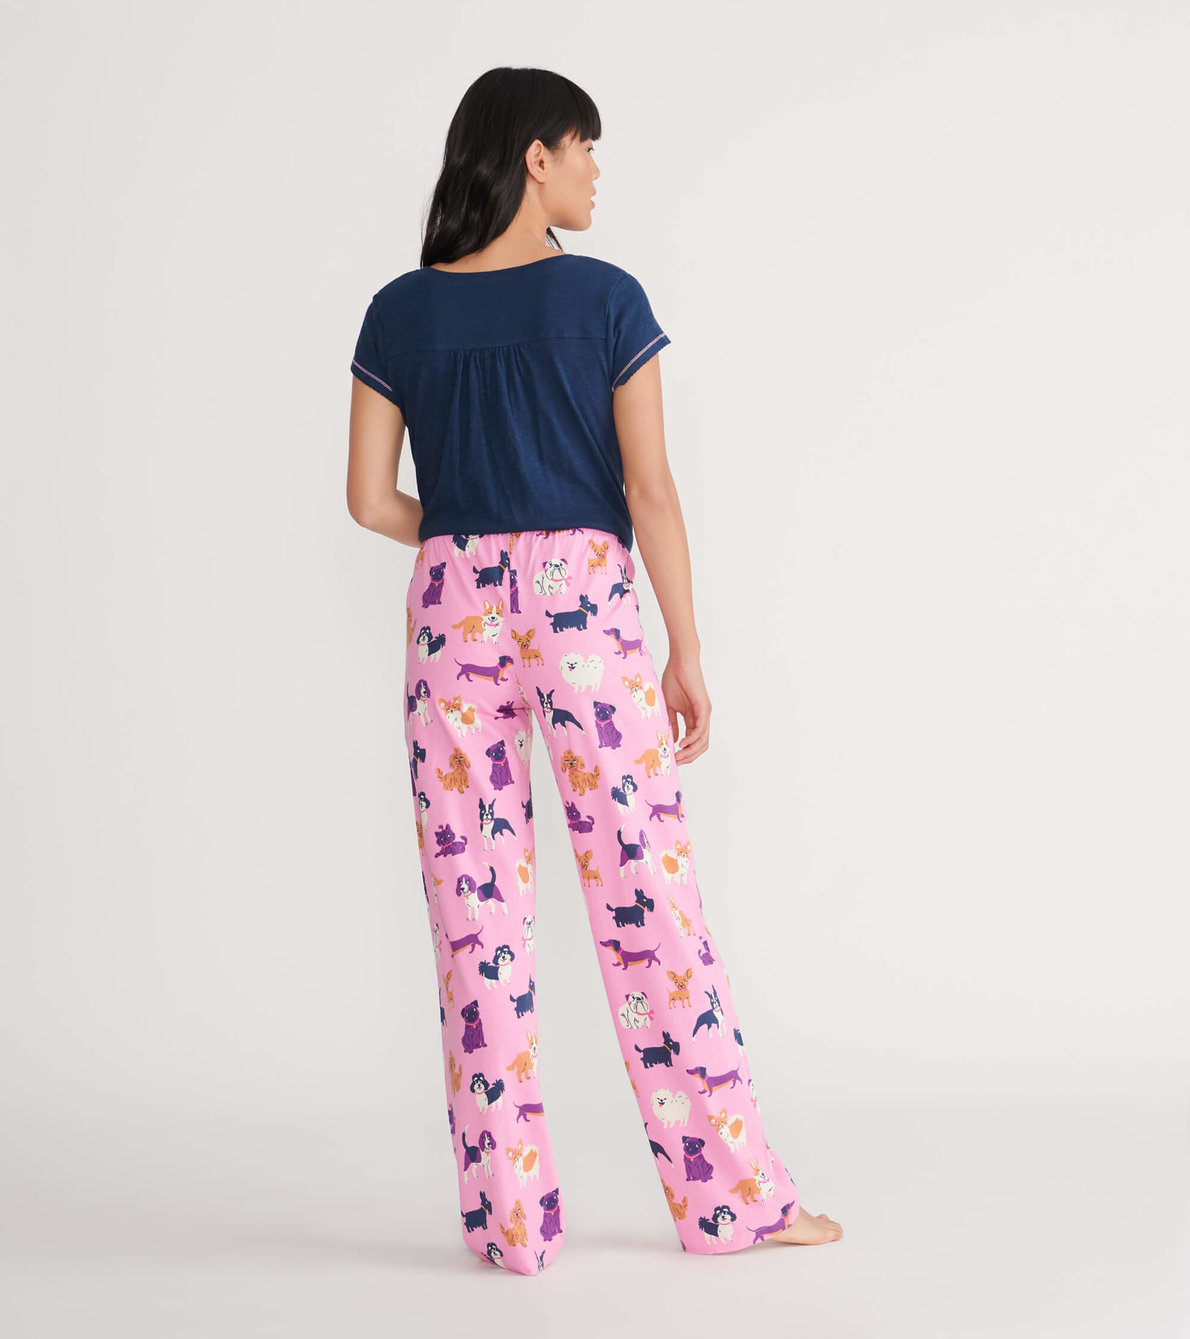 View larger image of Cheerful Dogs Women's Jersey Pajama Pants